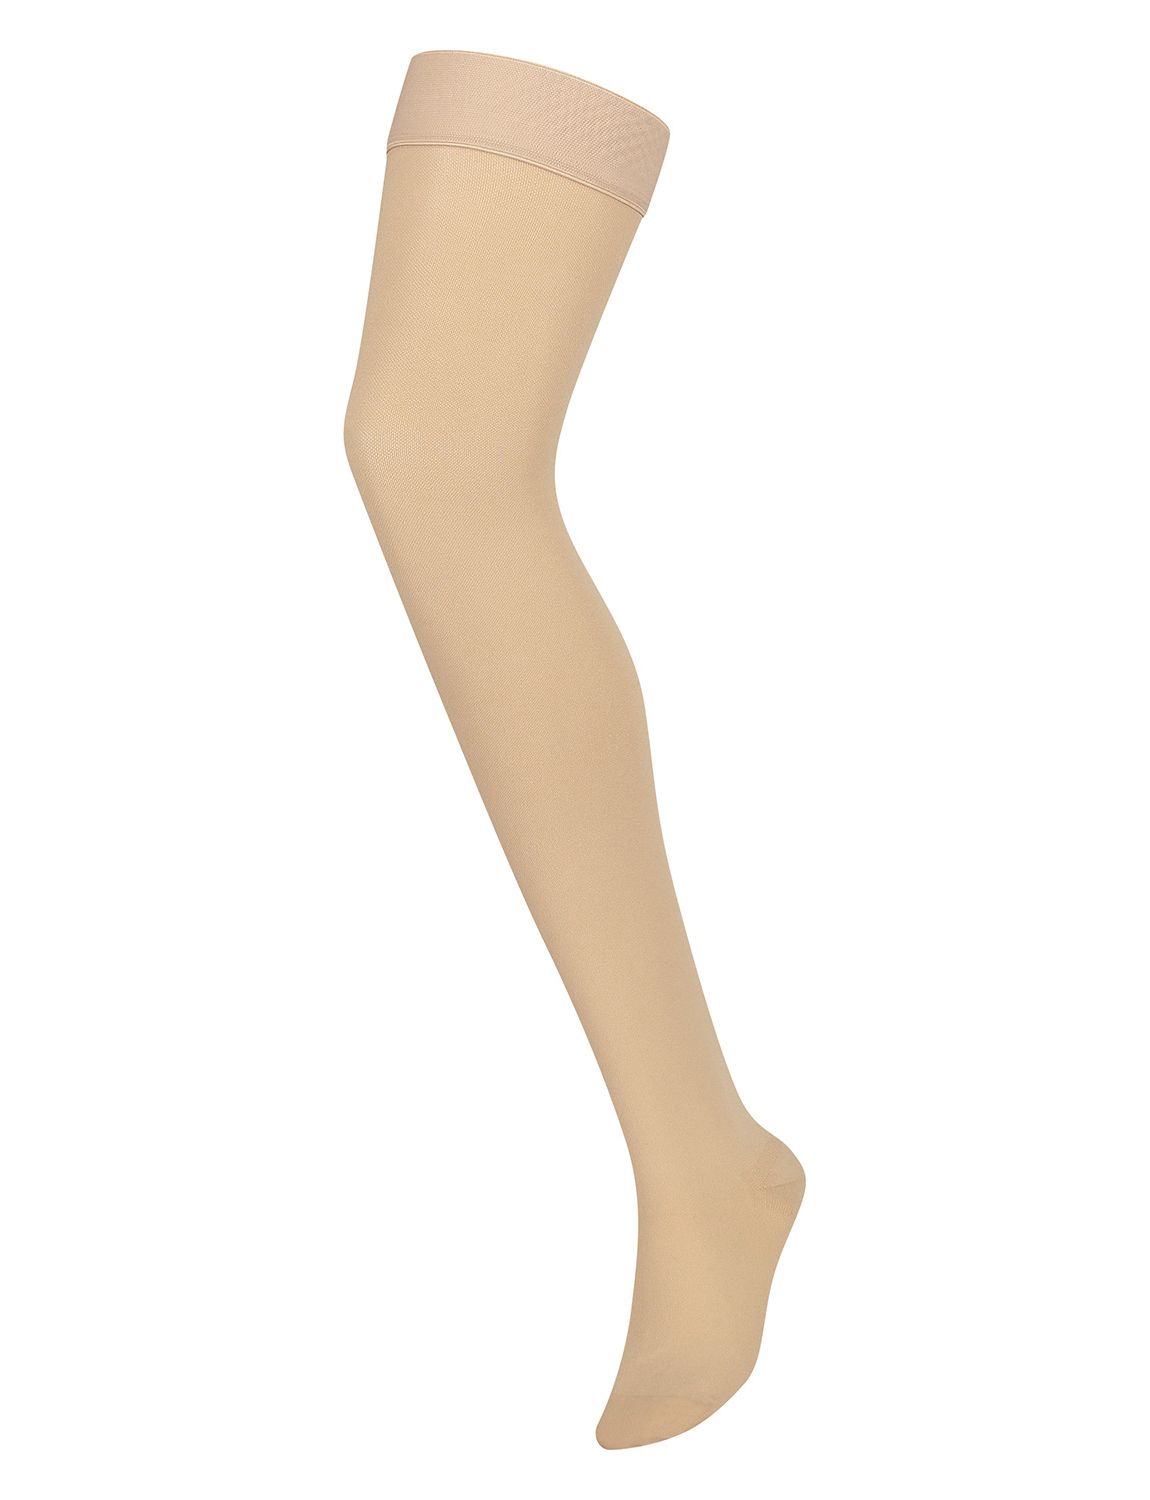 dunimed premium comfort compression stockings groin length closed toe for sale